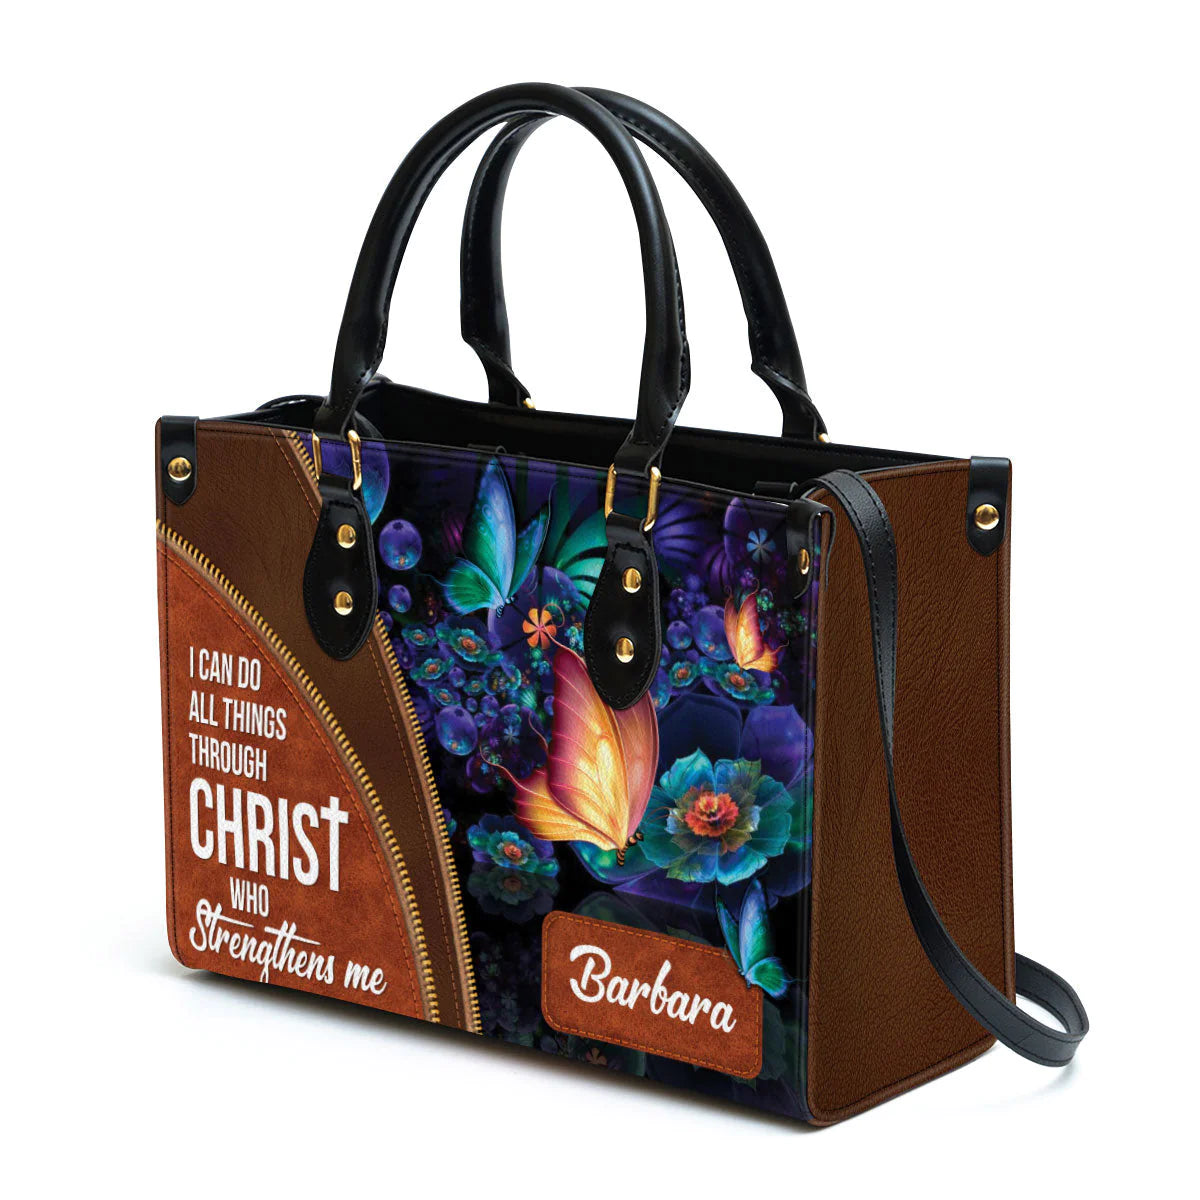 Christianartbag Handbags, I Can Do All Things Through Christ Leather Bags, Personalized Bags, Gifts for Women, Christmas Gift, CABLTB01300723. - Christian Art Bag